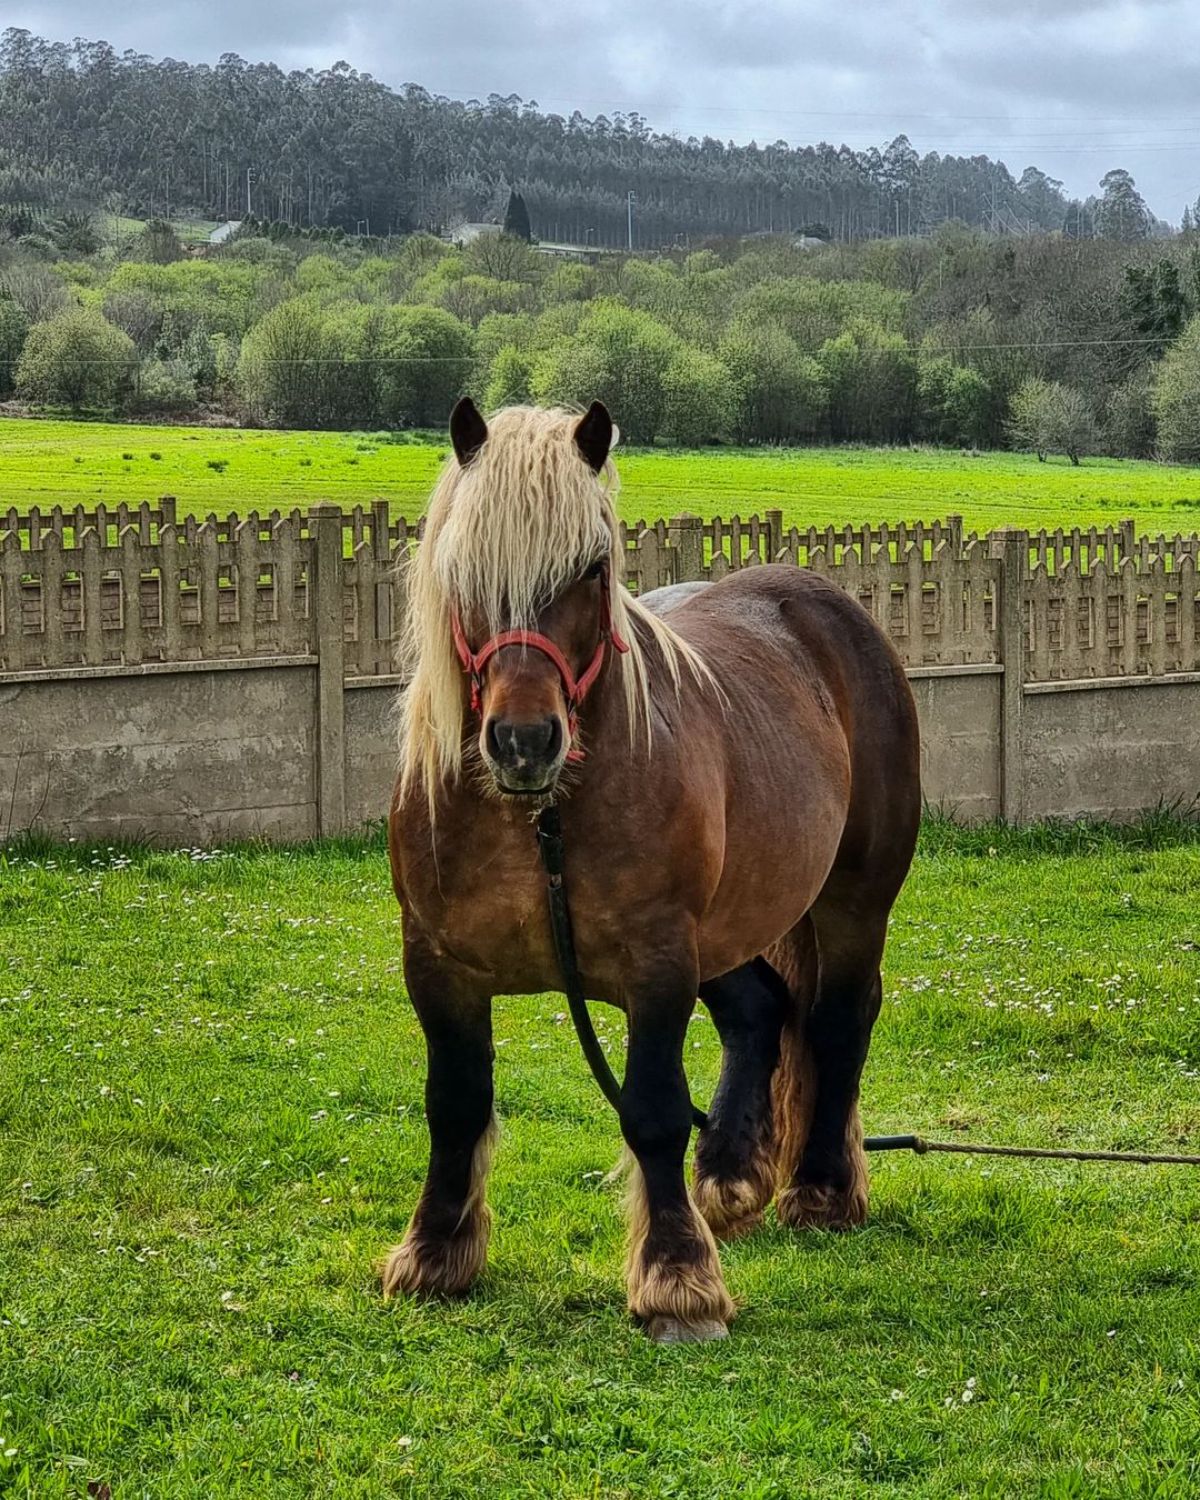 An adorable brown Hispano-Breton horse with a white mane stands on a ranch,